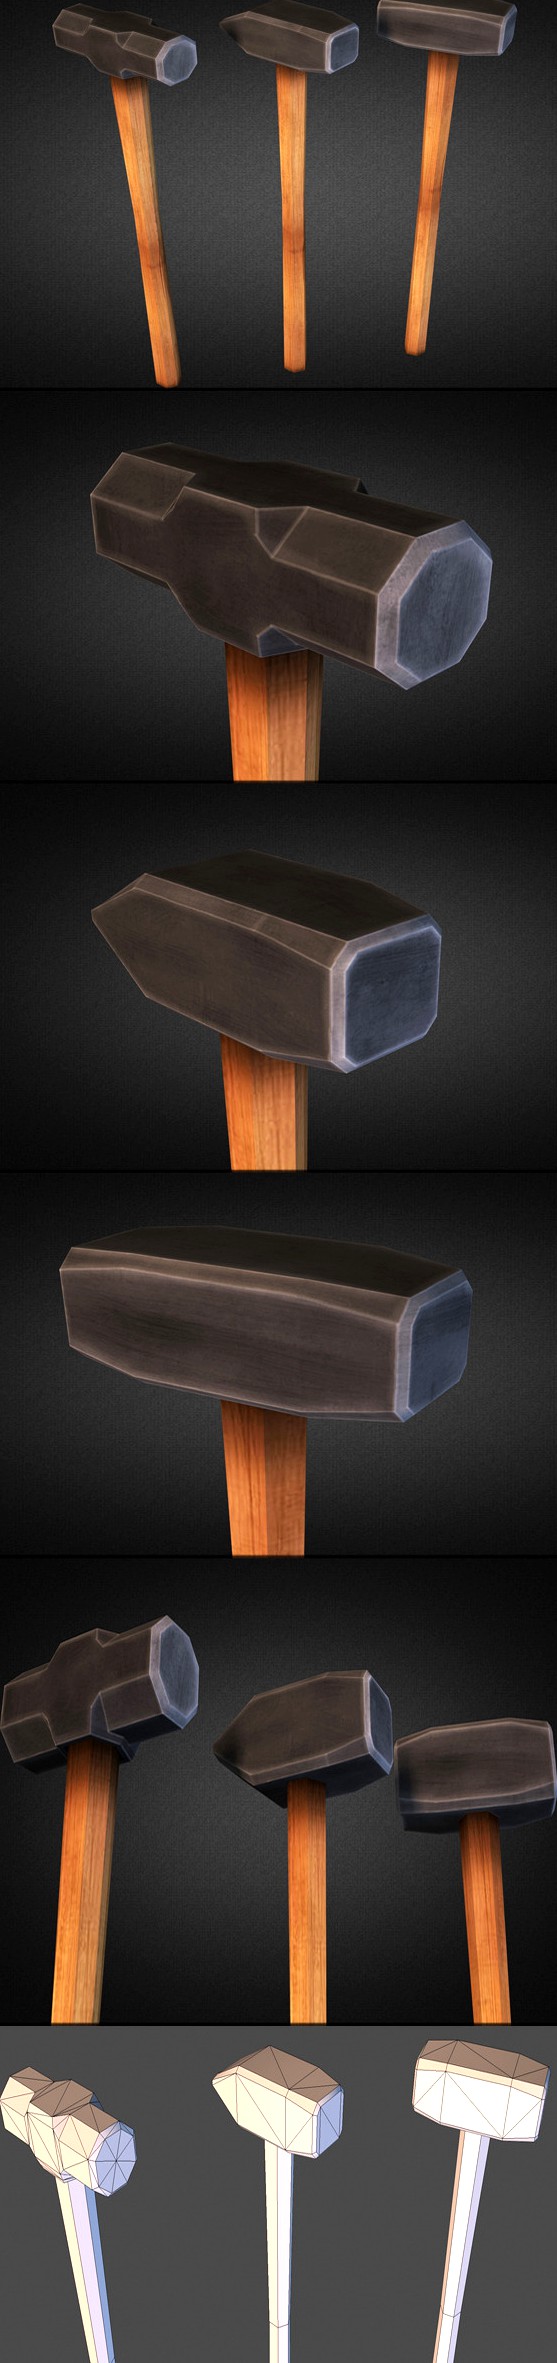 Sledgehammers - Low Poly